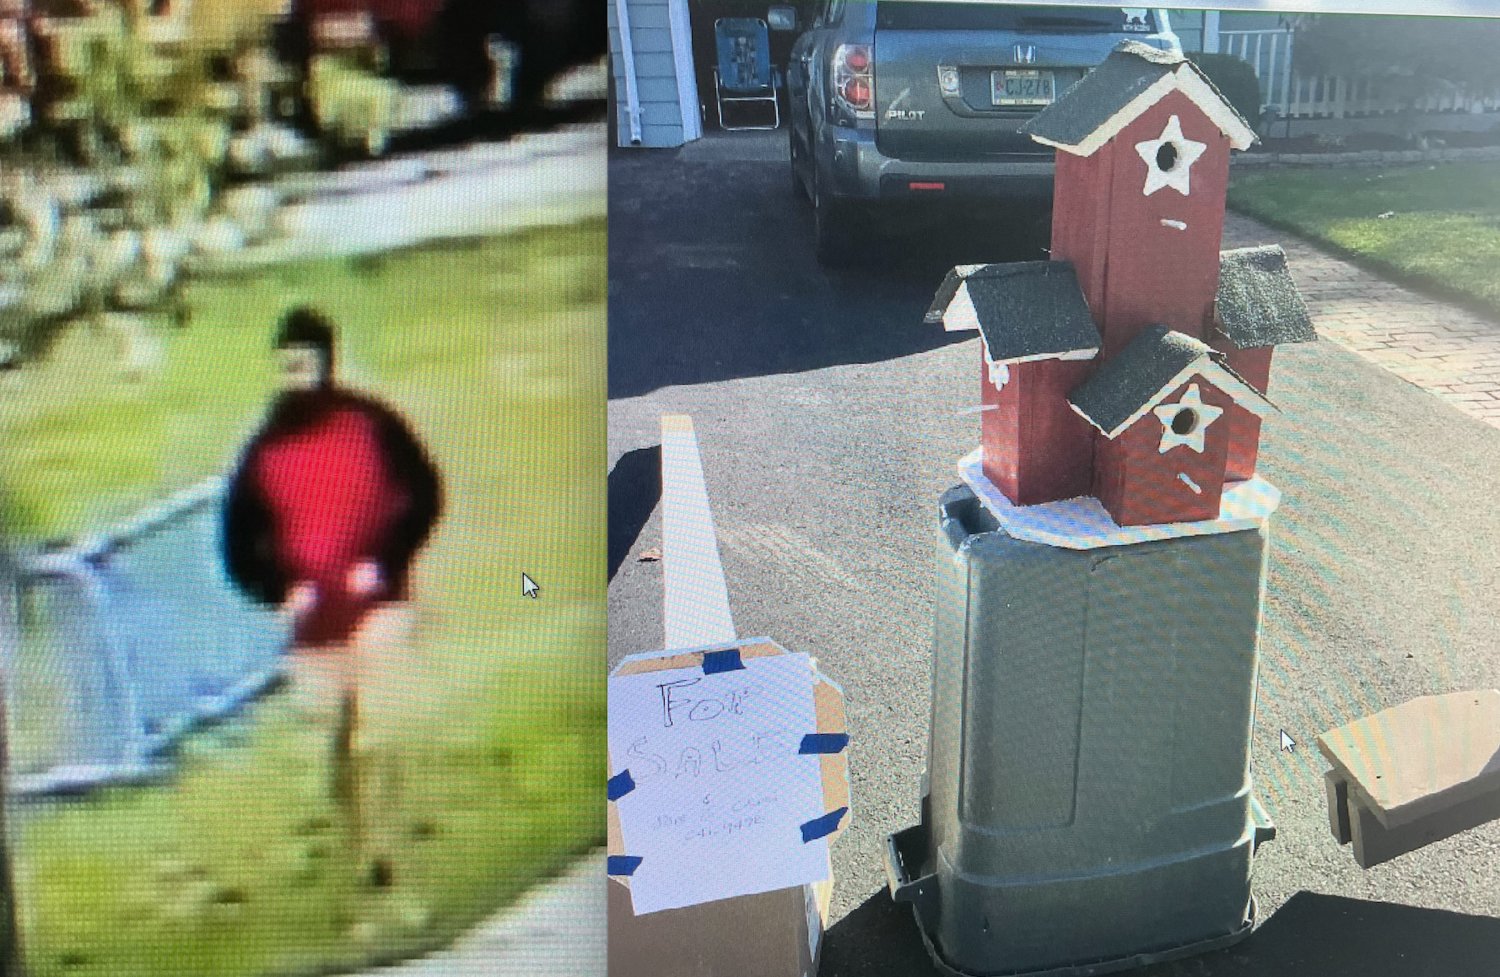 Left: Barrington Police are seeking information about a man who stole a bicycle off a rack outside Sowams School on Monday, May 2. Right: A New Meadow Road resident told police someone driving a silver van stole a birdhouse from his property.